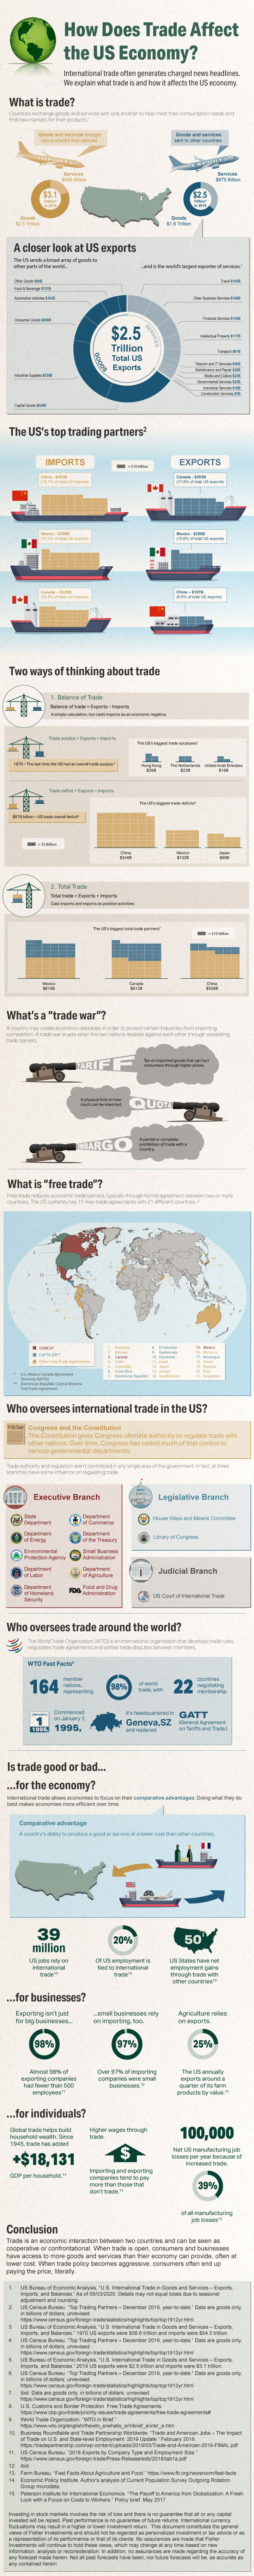 Infographic of How trade affects the U.S. economy